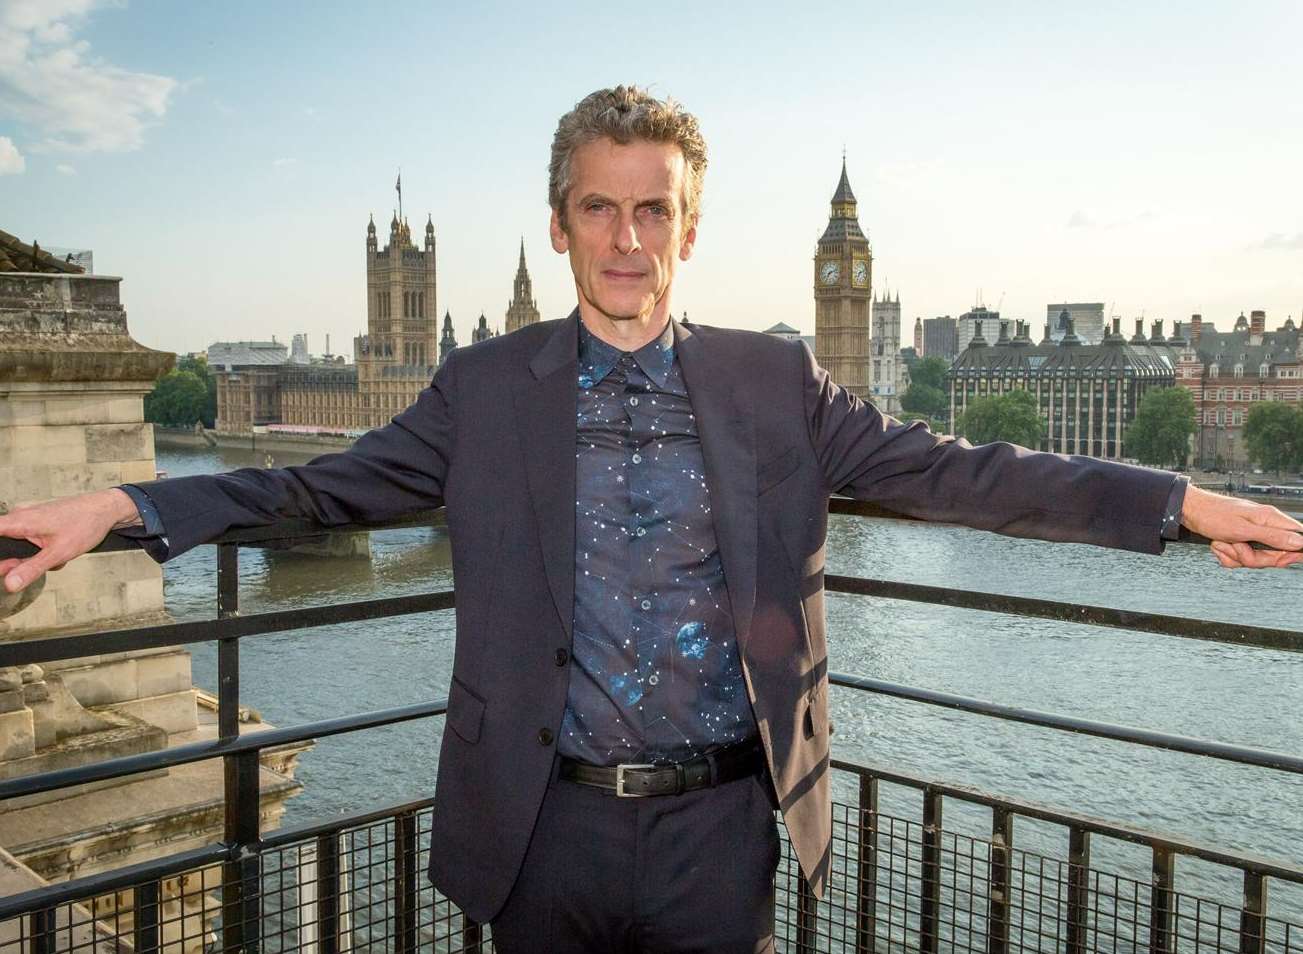 Peter Capaldi will be the 12th Doctor